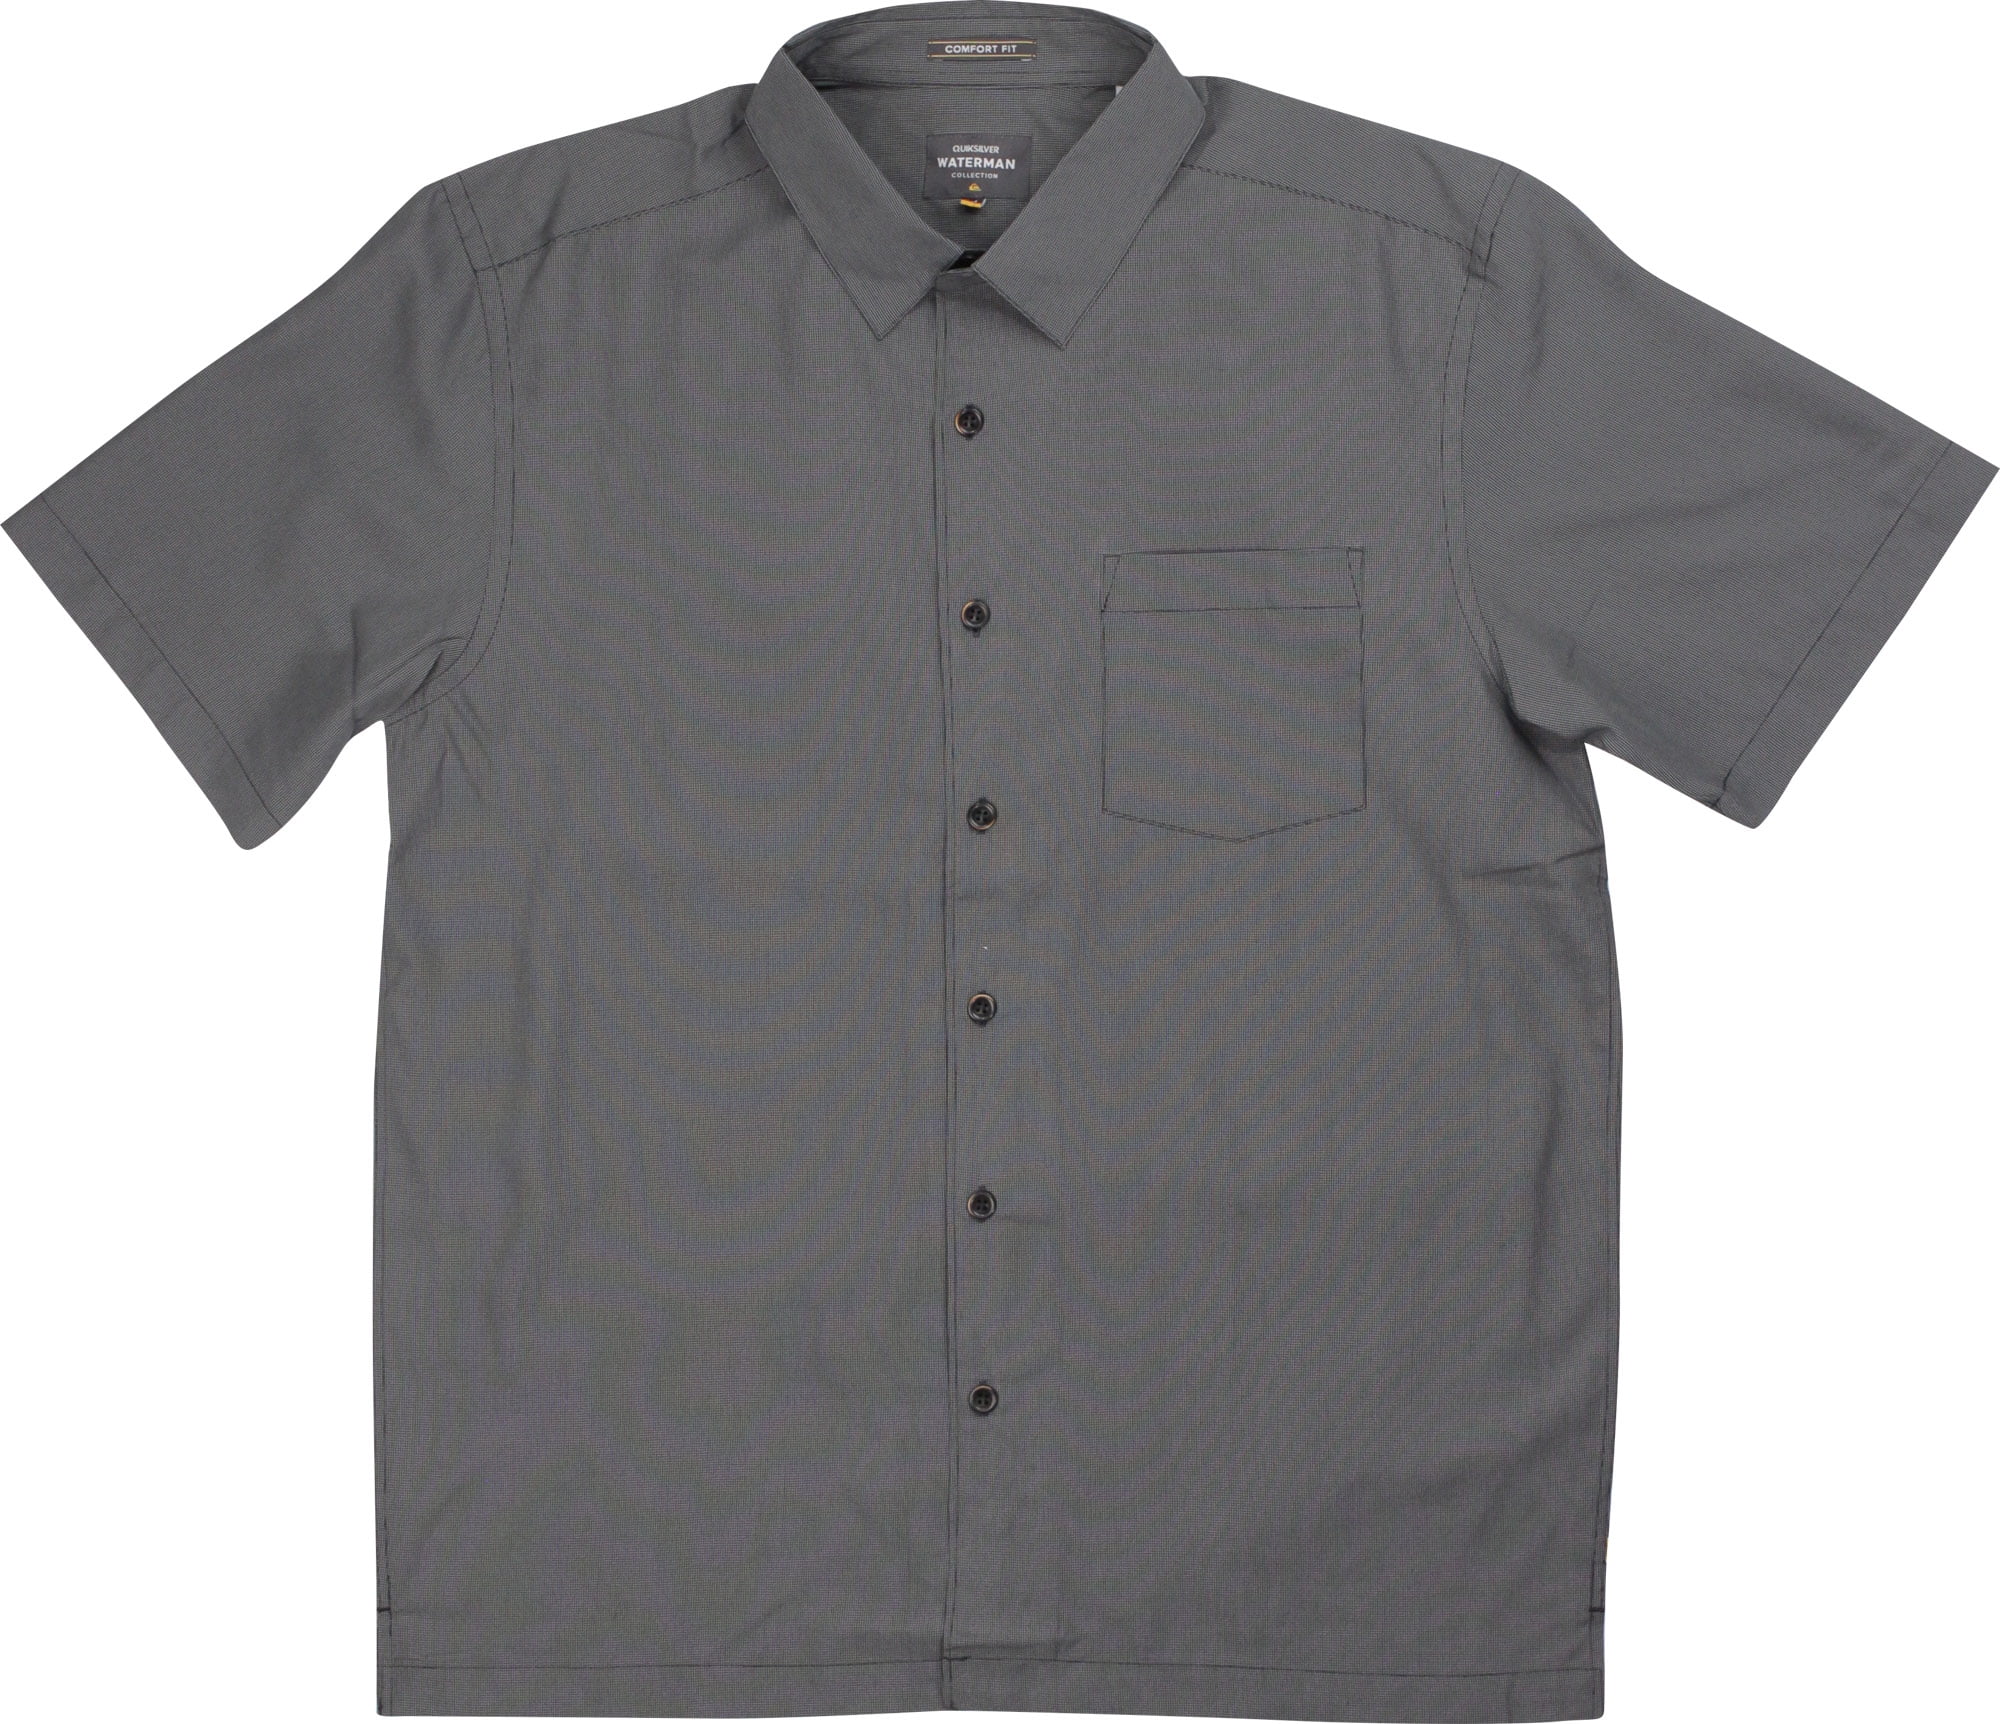 Quiksilver - Quiksilver Mens Waterman Collection Cane Island SS Shirt ...